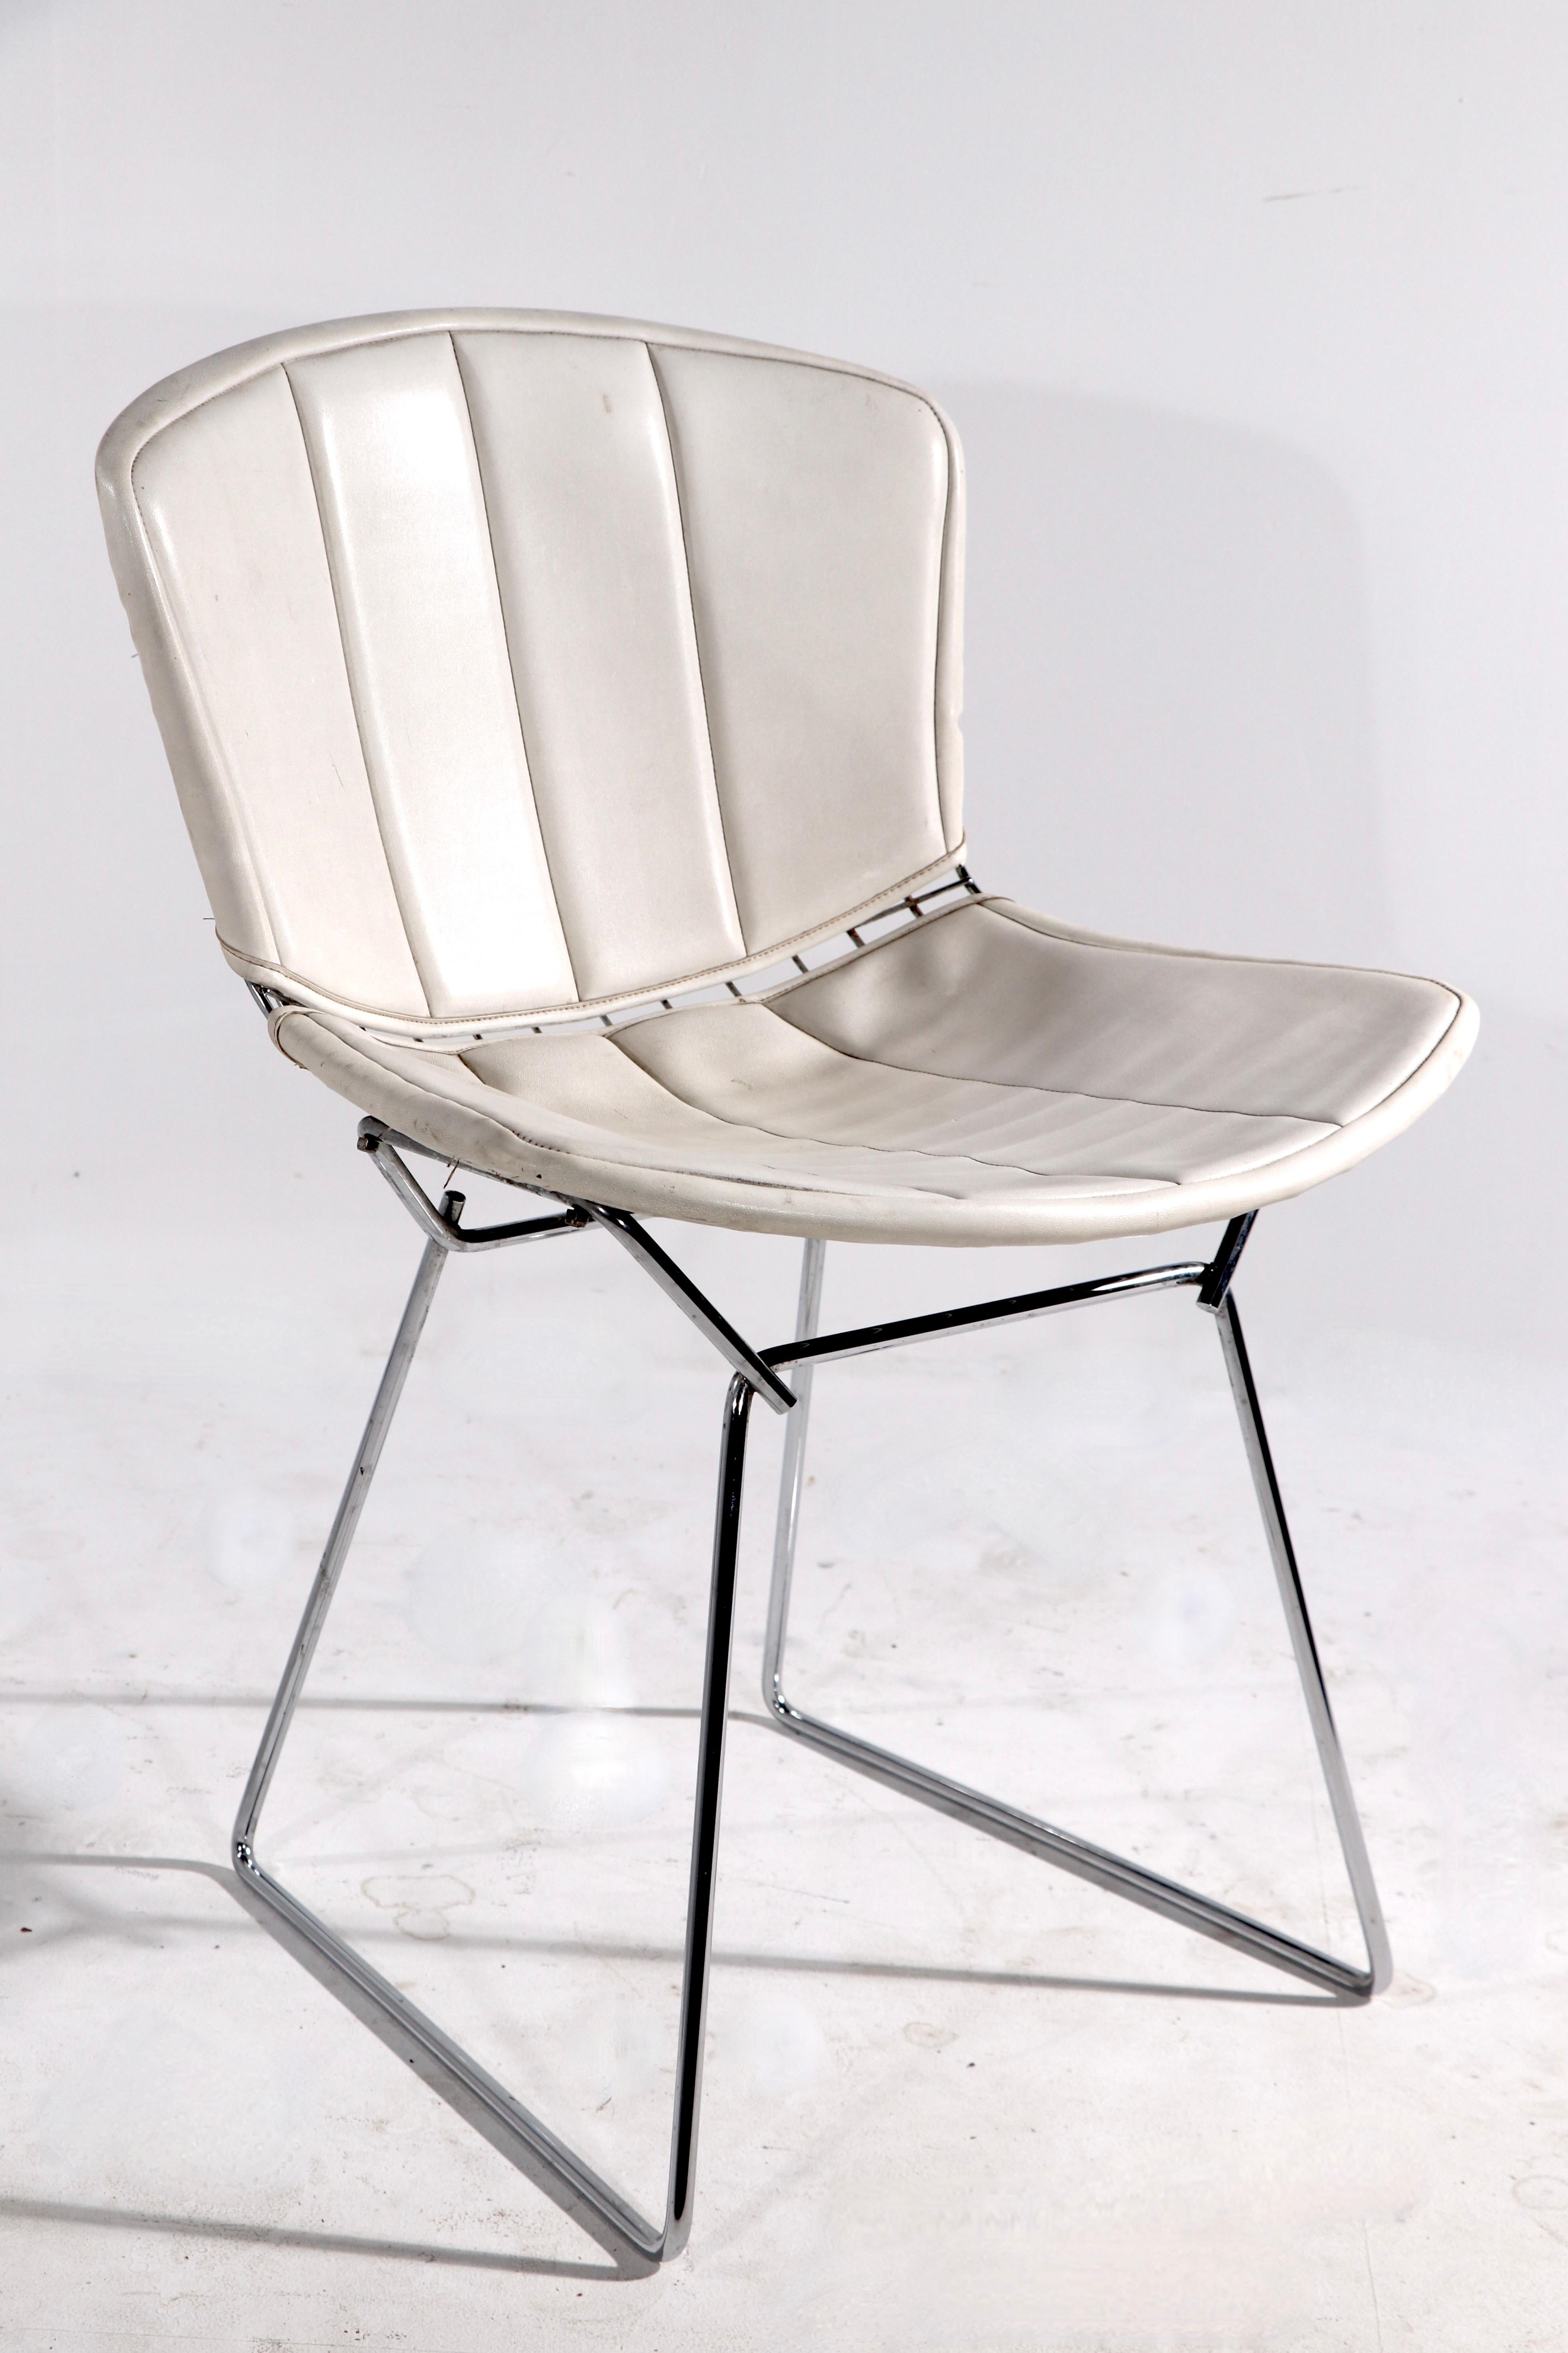 Set of Four Chrome Dining Chairs by Bertoia for Knoll In Good Condition For Sale In New York, NY